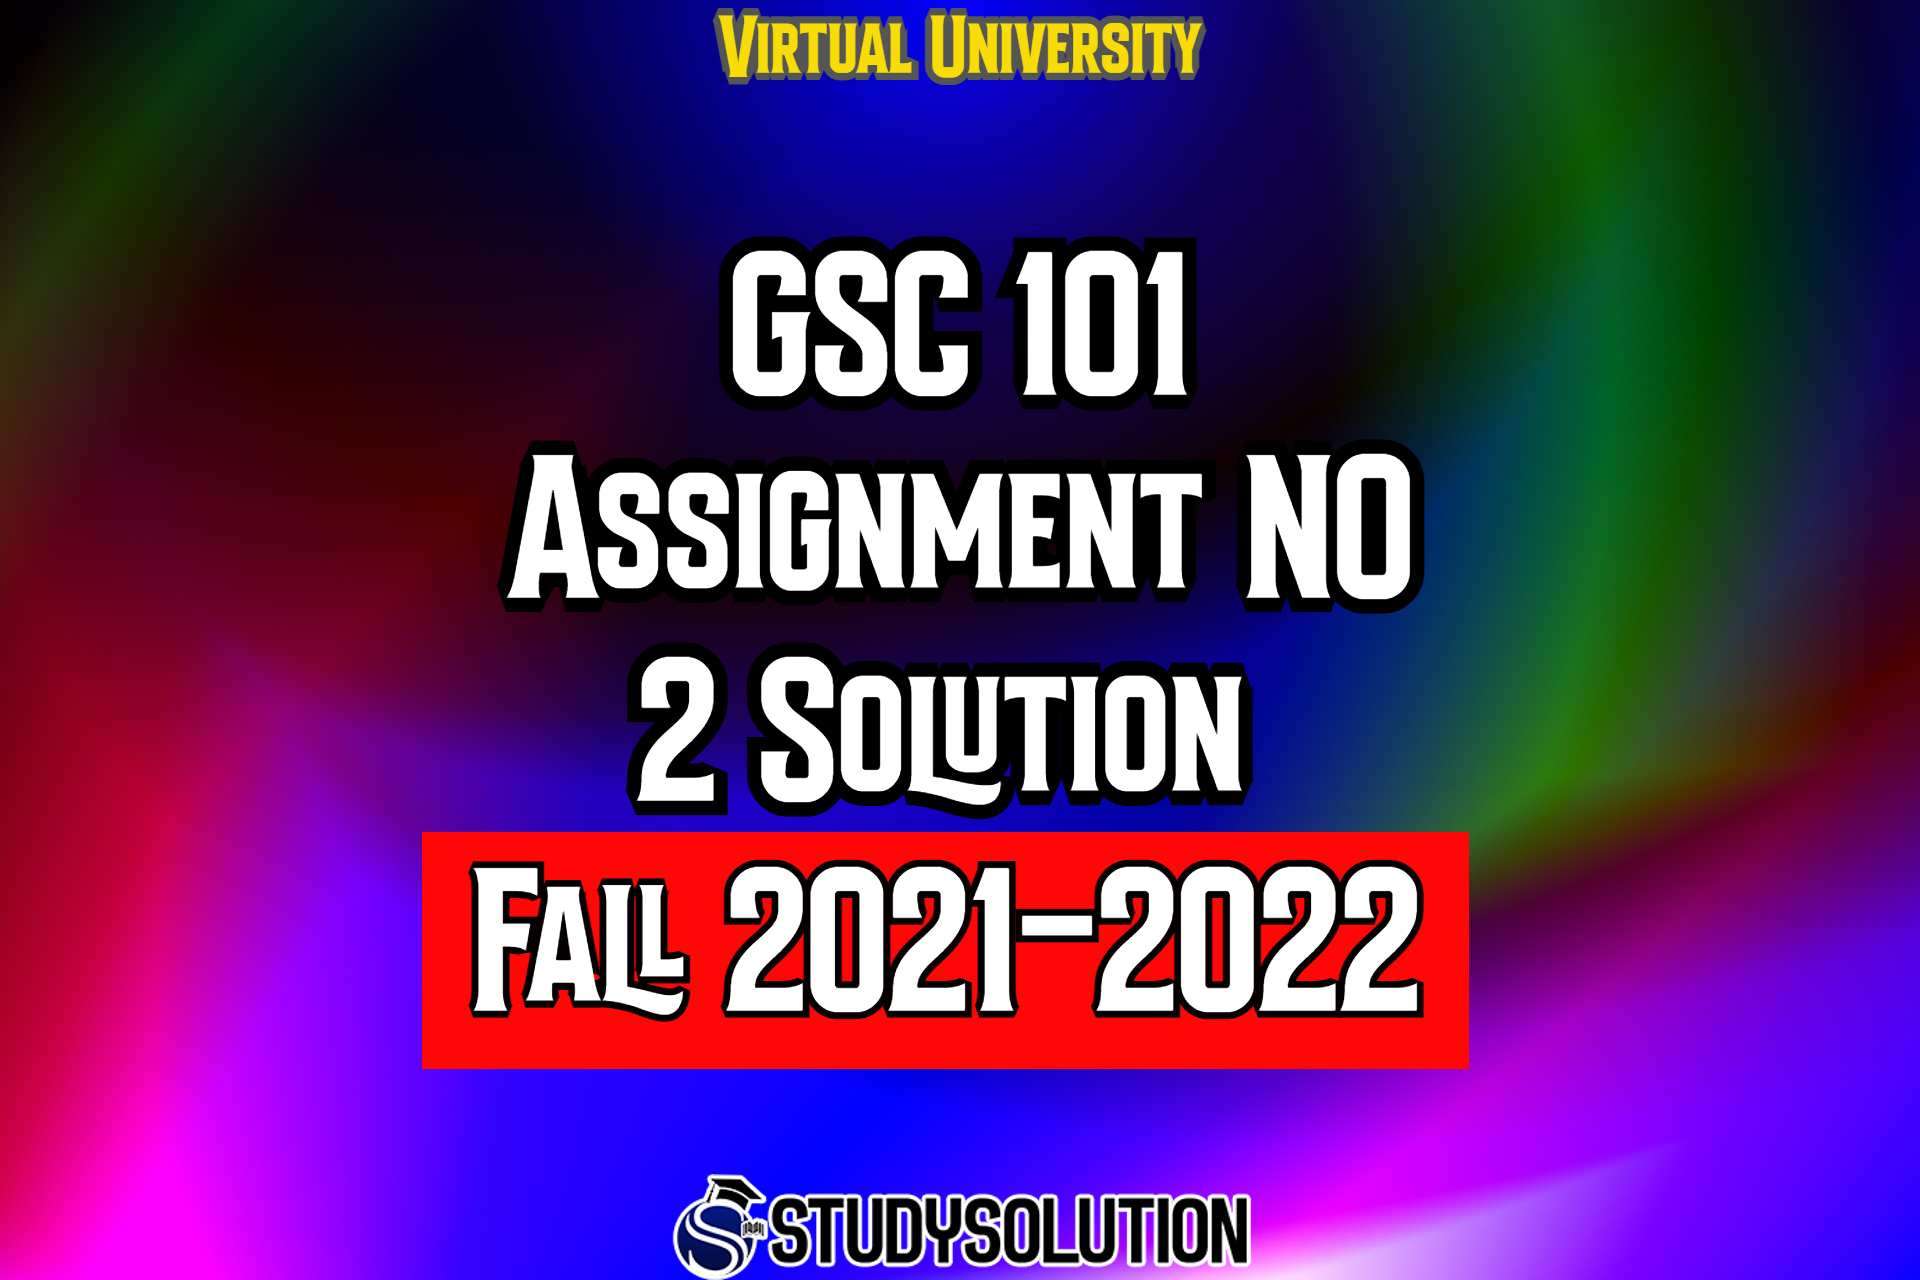 GSC101 Assignment No 2 Solution Fall 2022